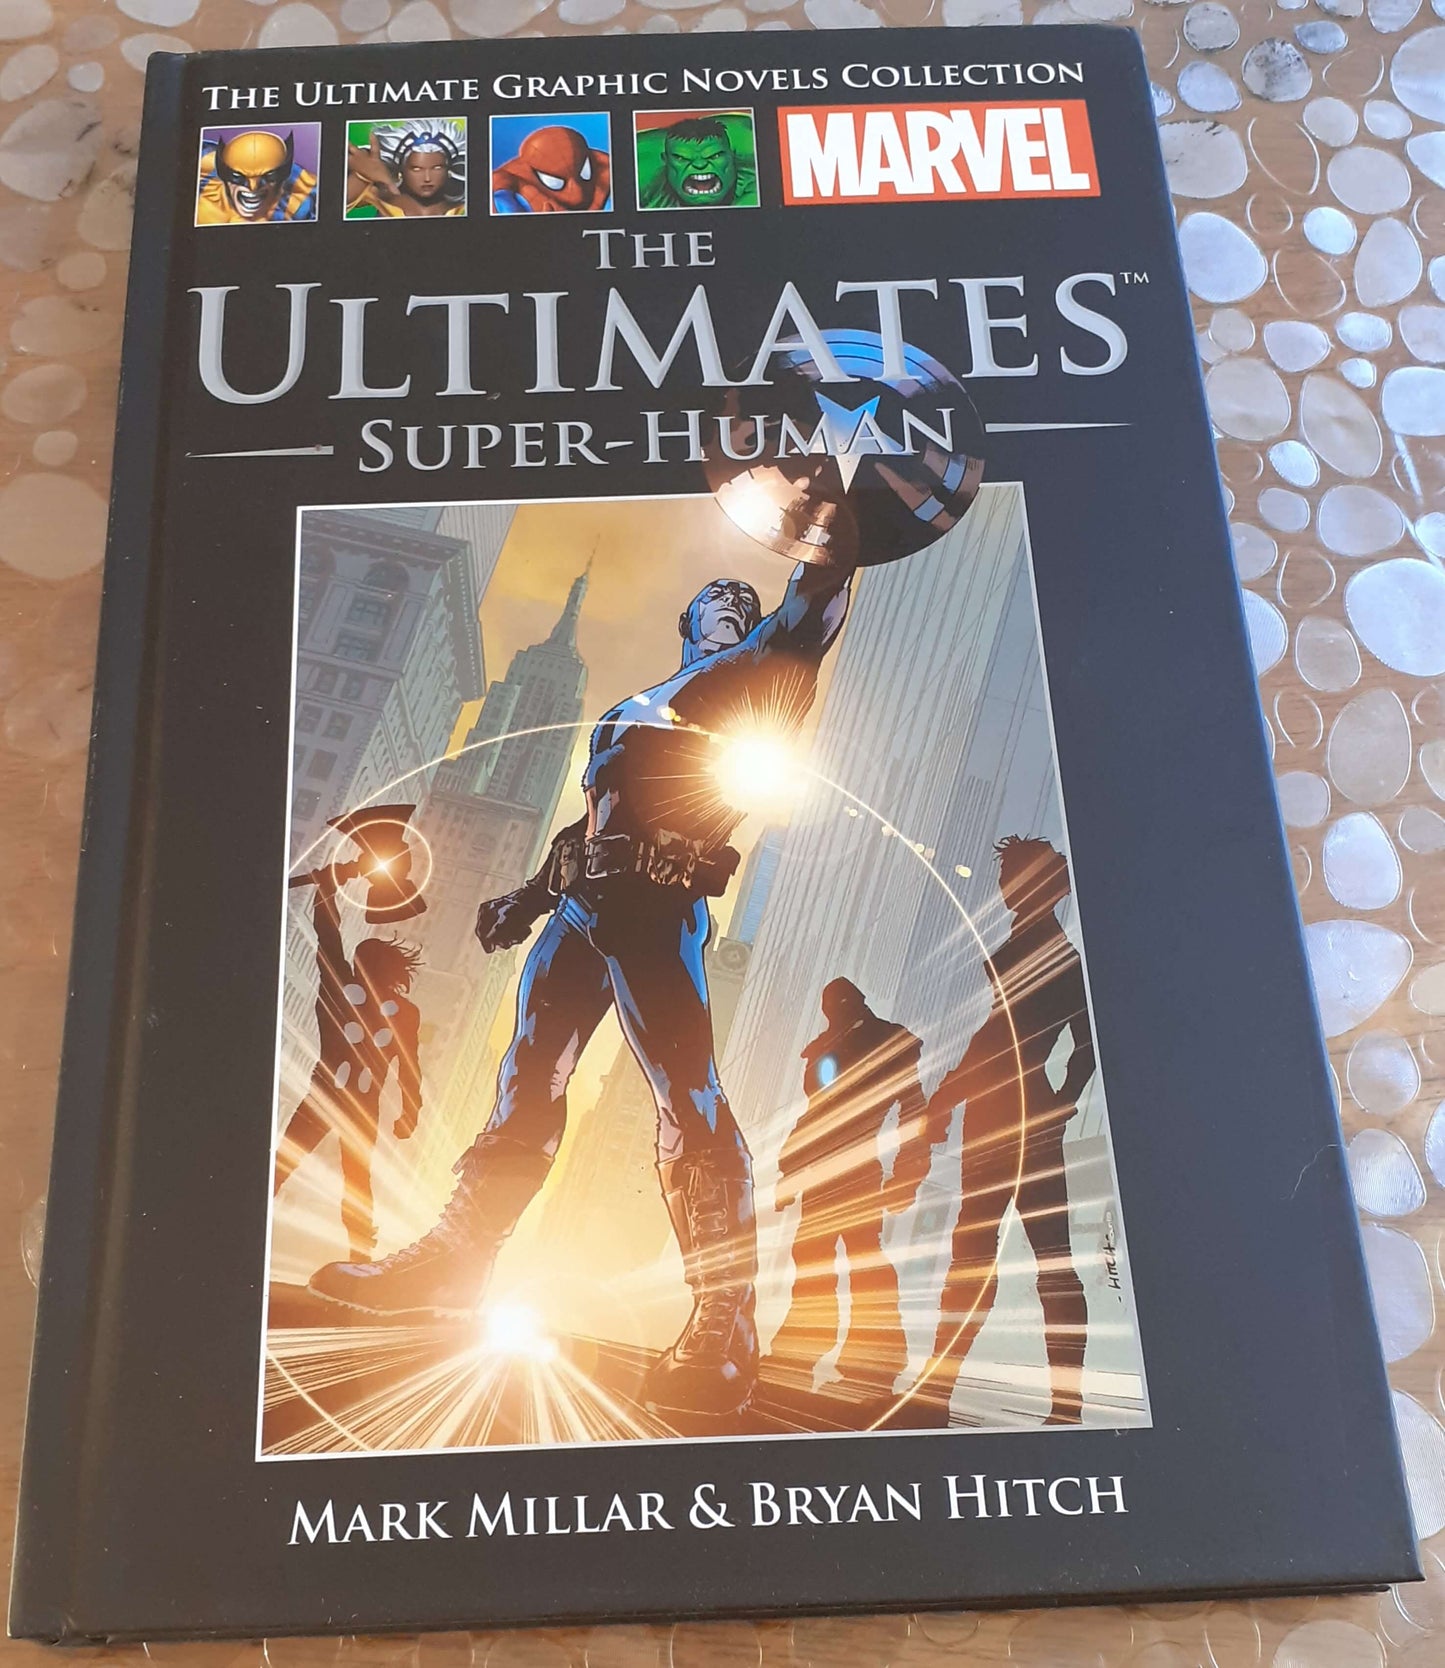 marvel comics, marvel graphic novels, marvel ultimate graphic collection, The Ultimates - Super-Human - Best Books